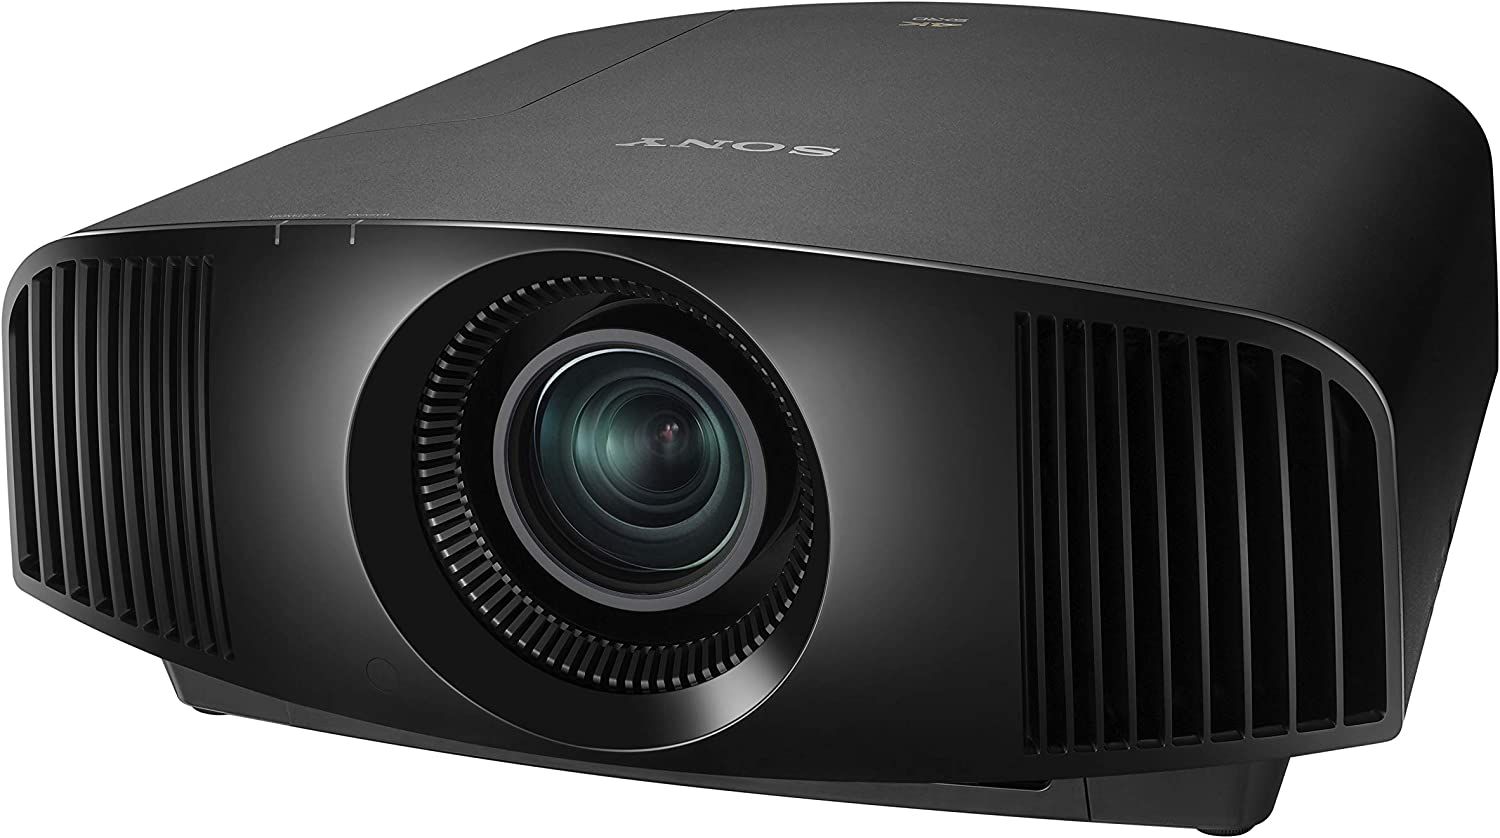 Sony VPL-VW295ES Home Theater Projector